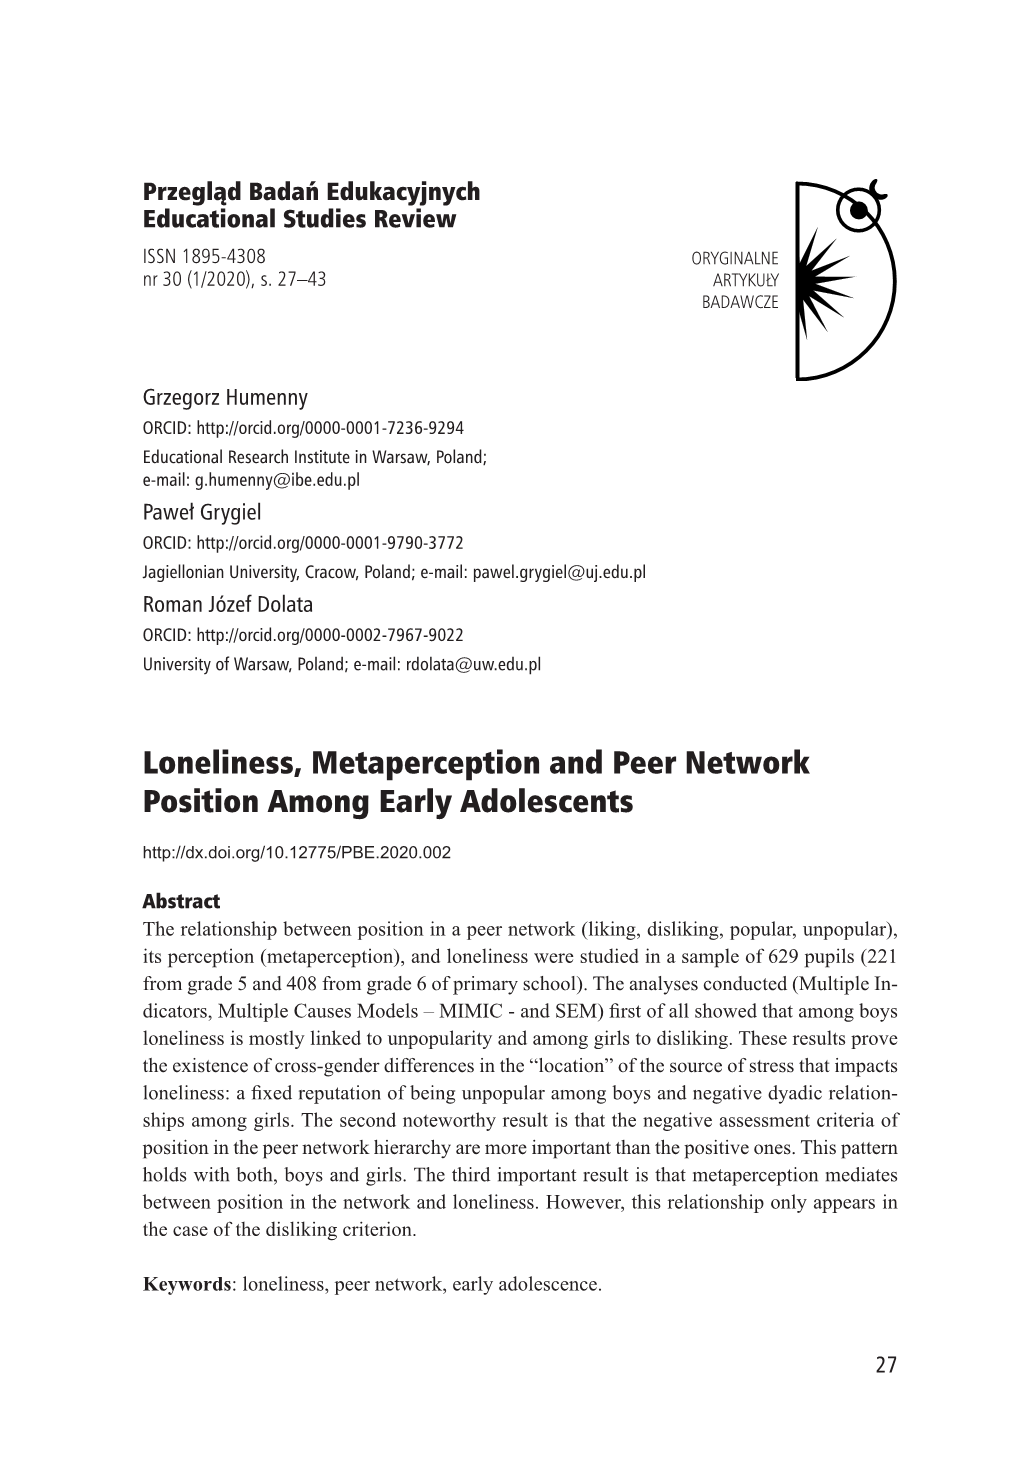 Loneliness, Metaperception and Peer Network Position Among Early Adolescents